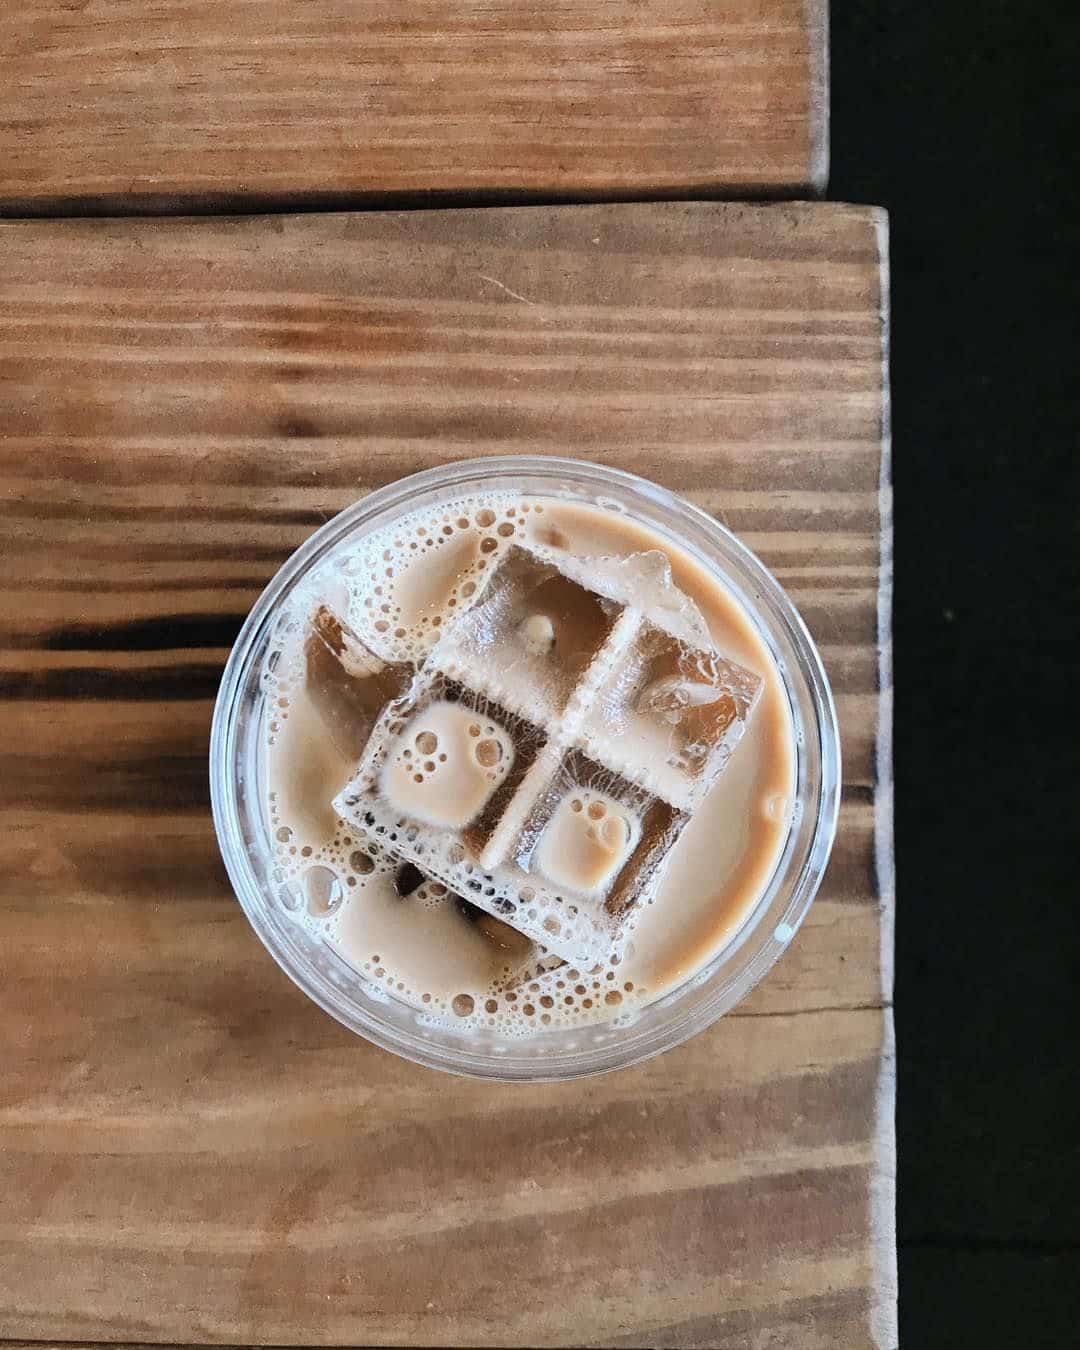 An Iced Chai Latte by Brewpoint Coffee, made with Oatly oatmilk Spring ...